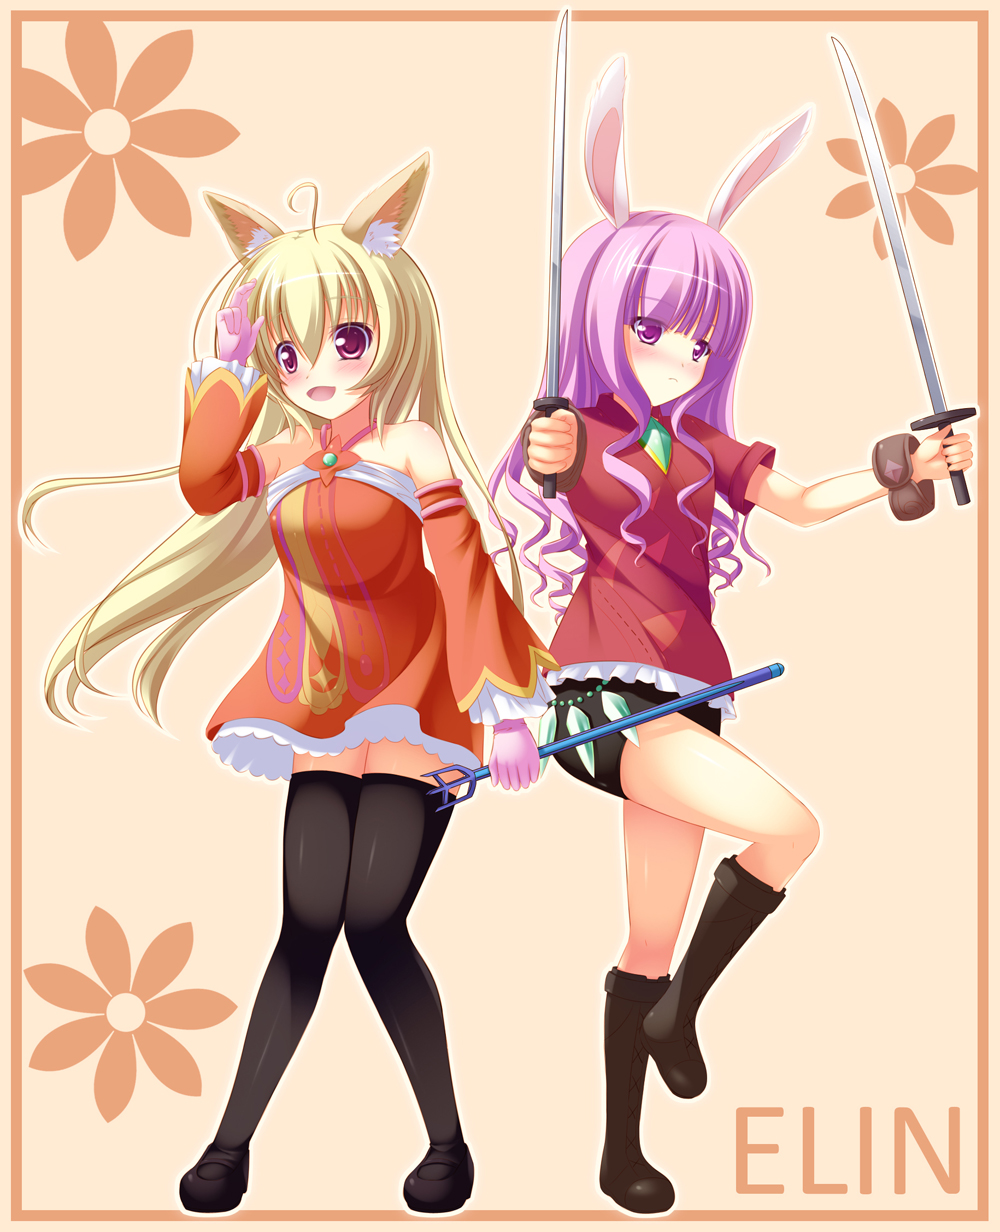 2girls ahoge animal_ears bare_shoulders black_footwear black_legwear blonde_hair blush boots breasts closed_mouth collarbone dog_ears dual_wielding elin_(tera) eyebrows_visible_through_hair highres holding holding_sword holding_weapon knee_boots large_breasts long_hair looking_at_viewer looking_away multiple_girls open_mouth psyche3313 purple_hair rabbit_ears red_eyes smile solo sword tera_online thigh-highs violet_eyes weapon